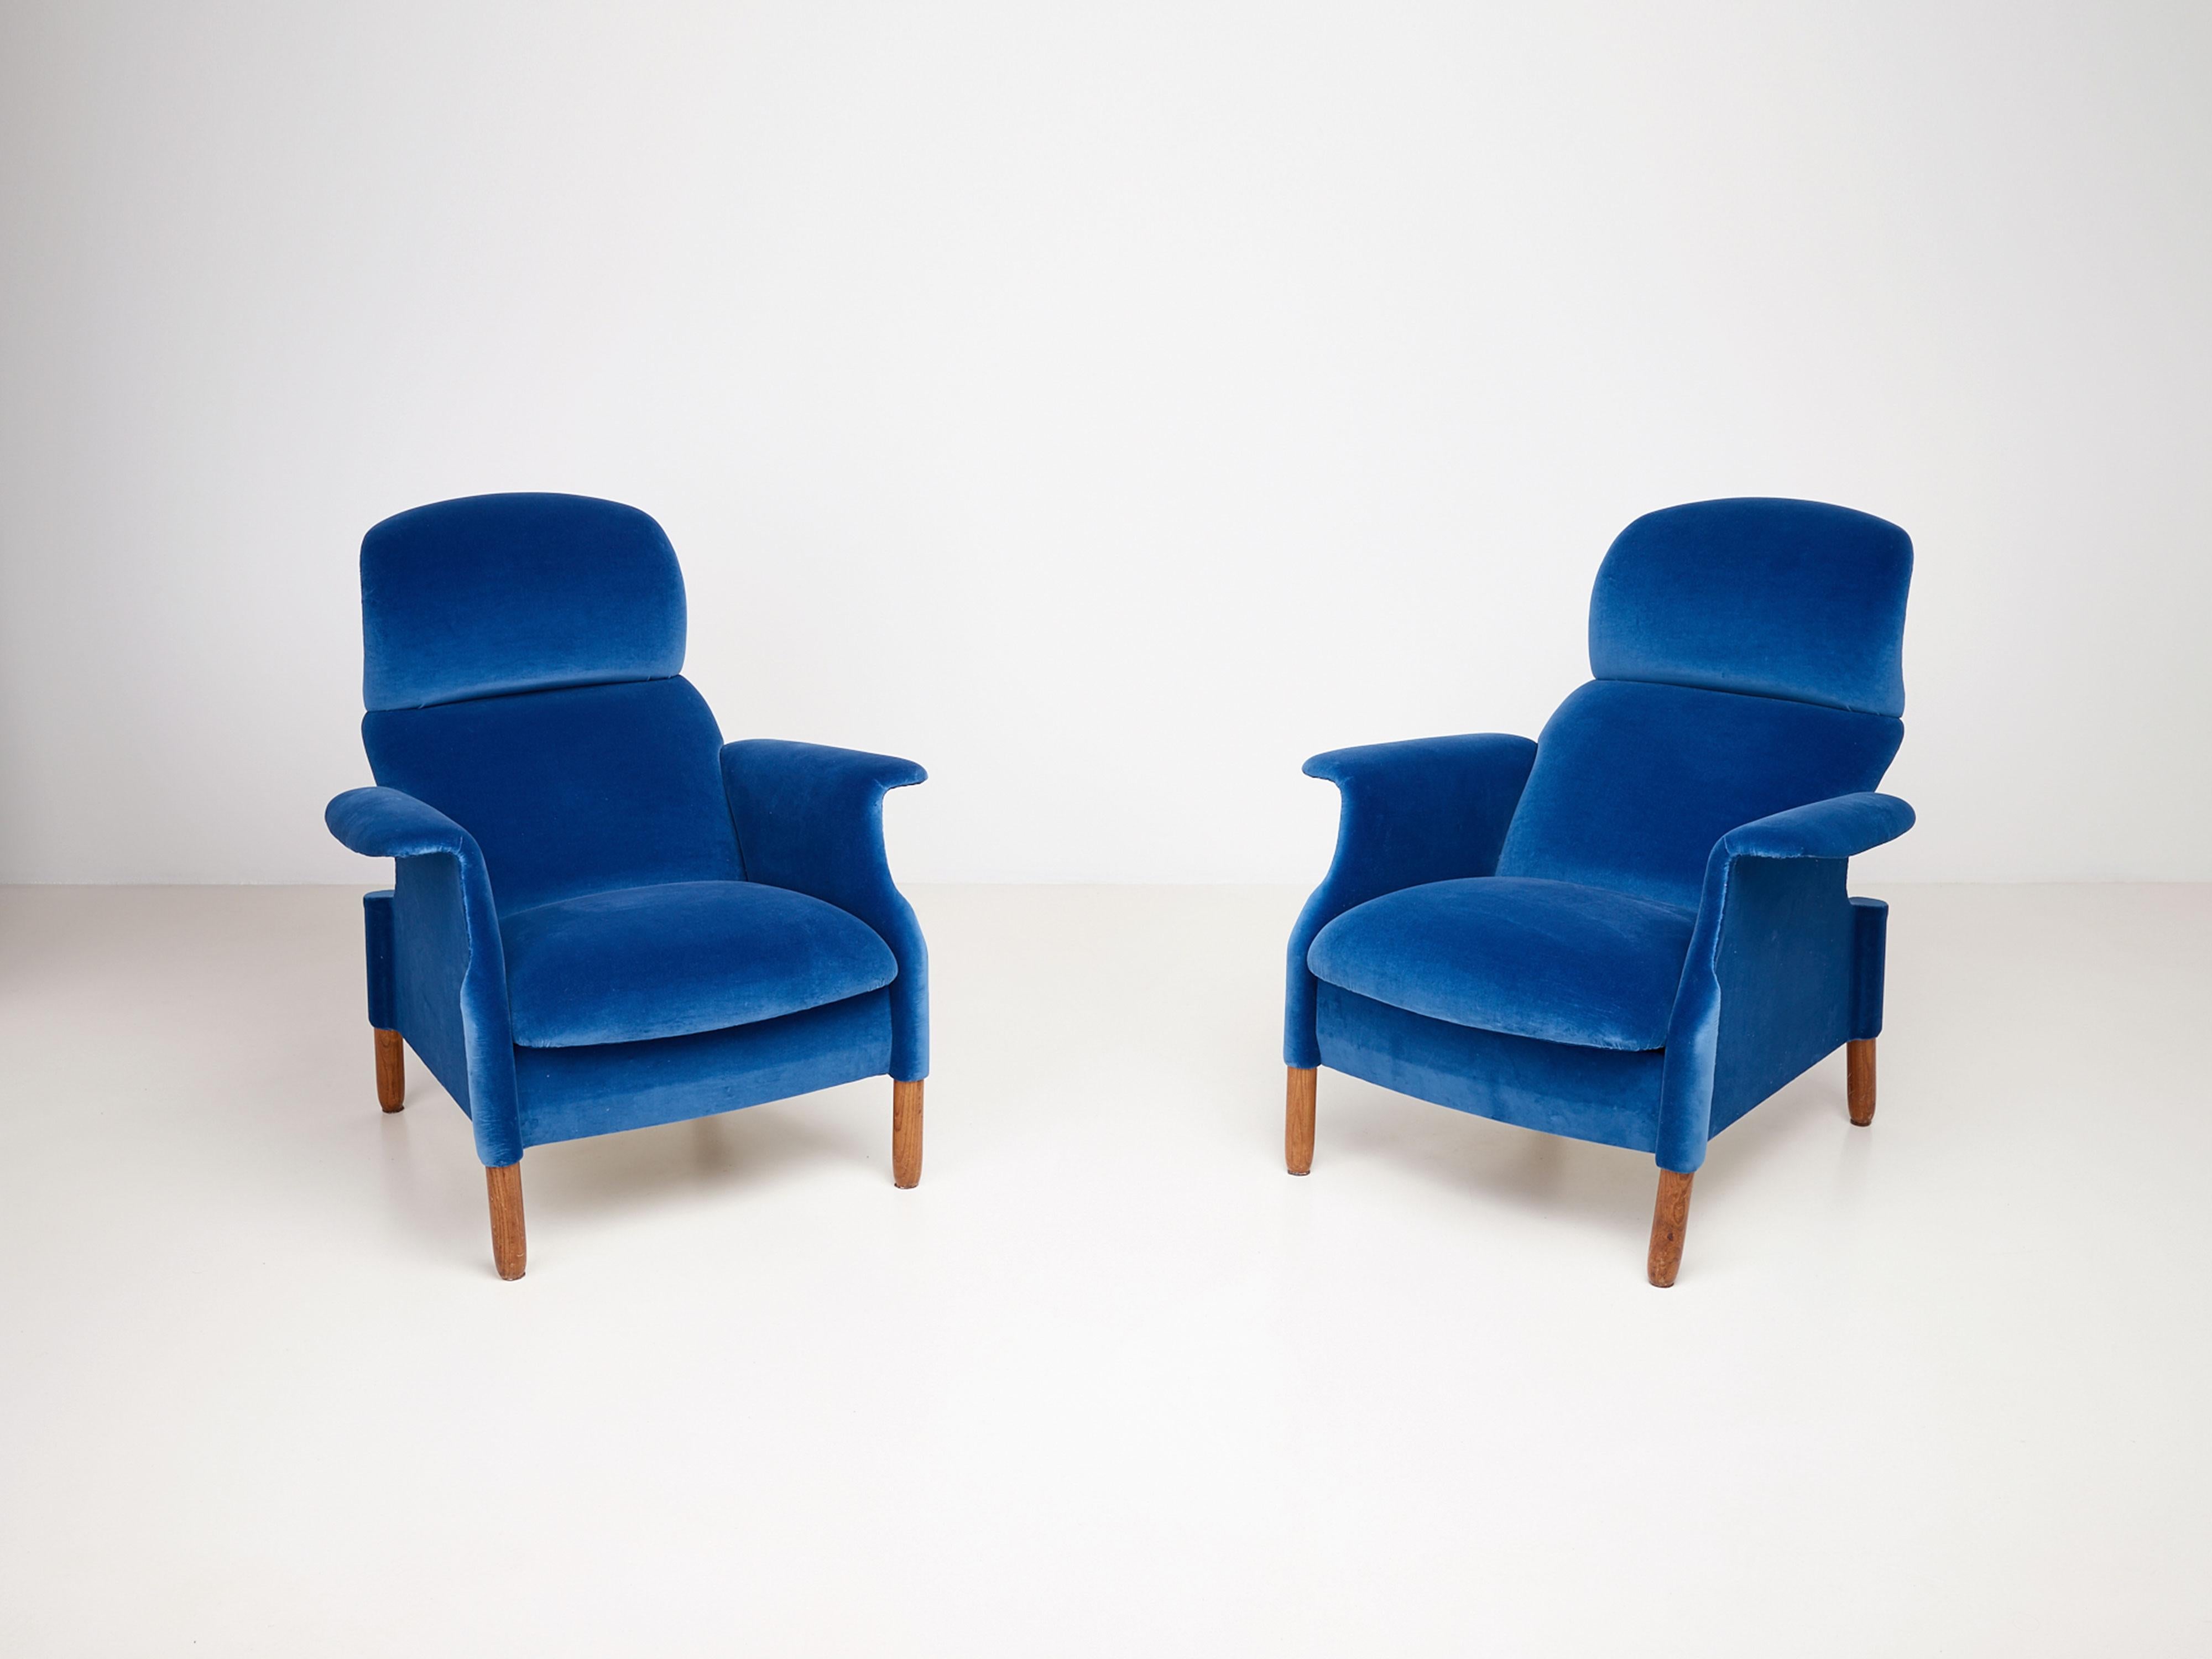 Pair of Sanluca armchairs by Achille and Pier Giacomo Castiglioni dating back to Gavina’s production, recently upholstered in cotton velvet. Each armchair is made of separate wooden curved pieces, connected to each other by screws. Polyurethane